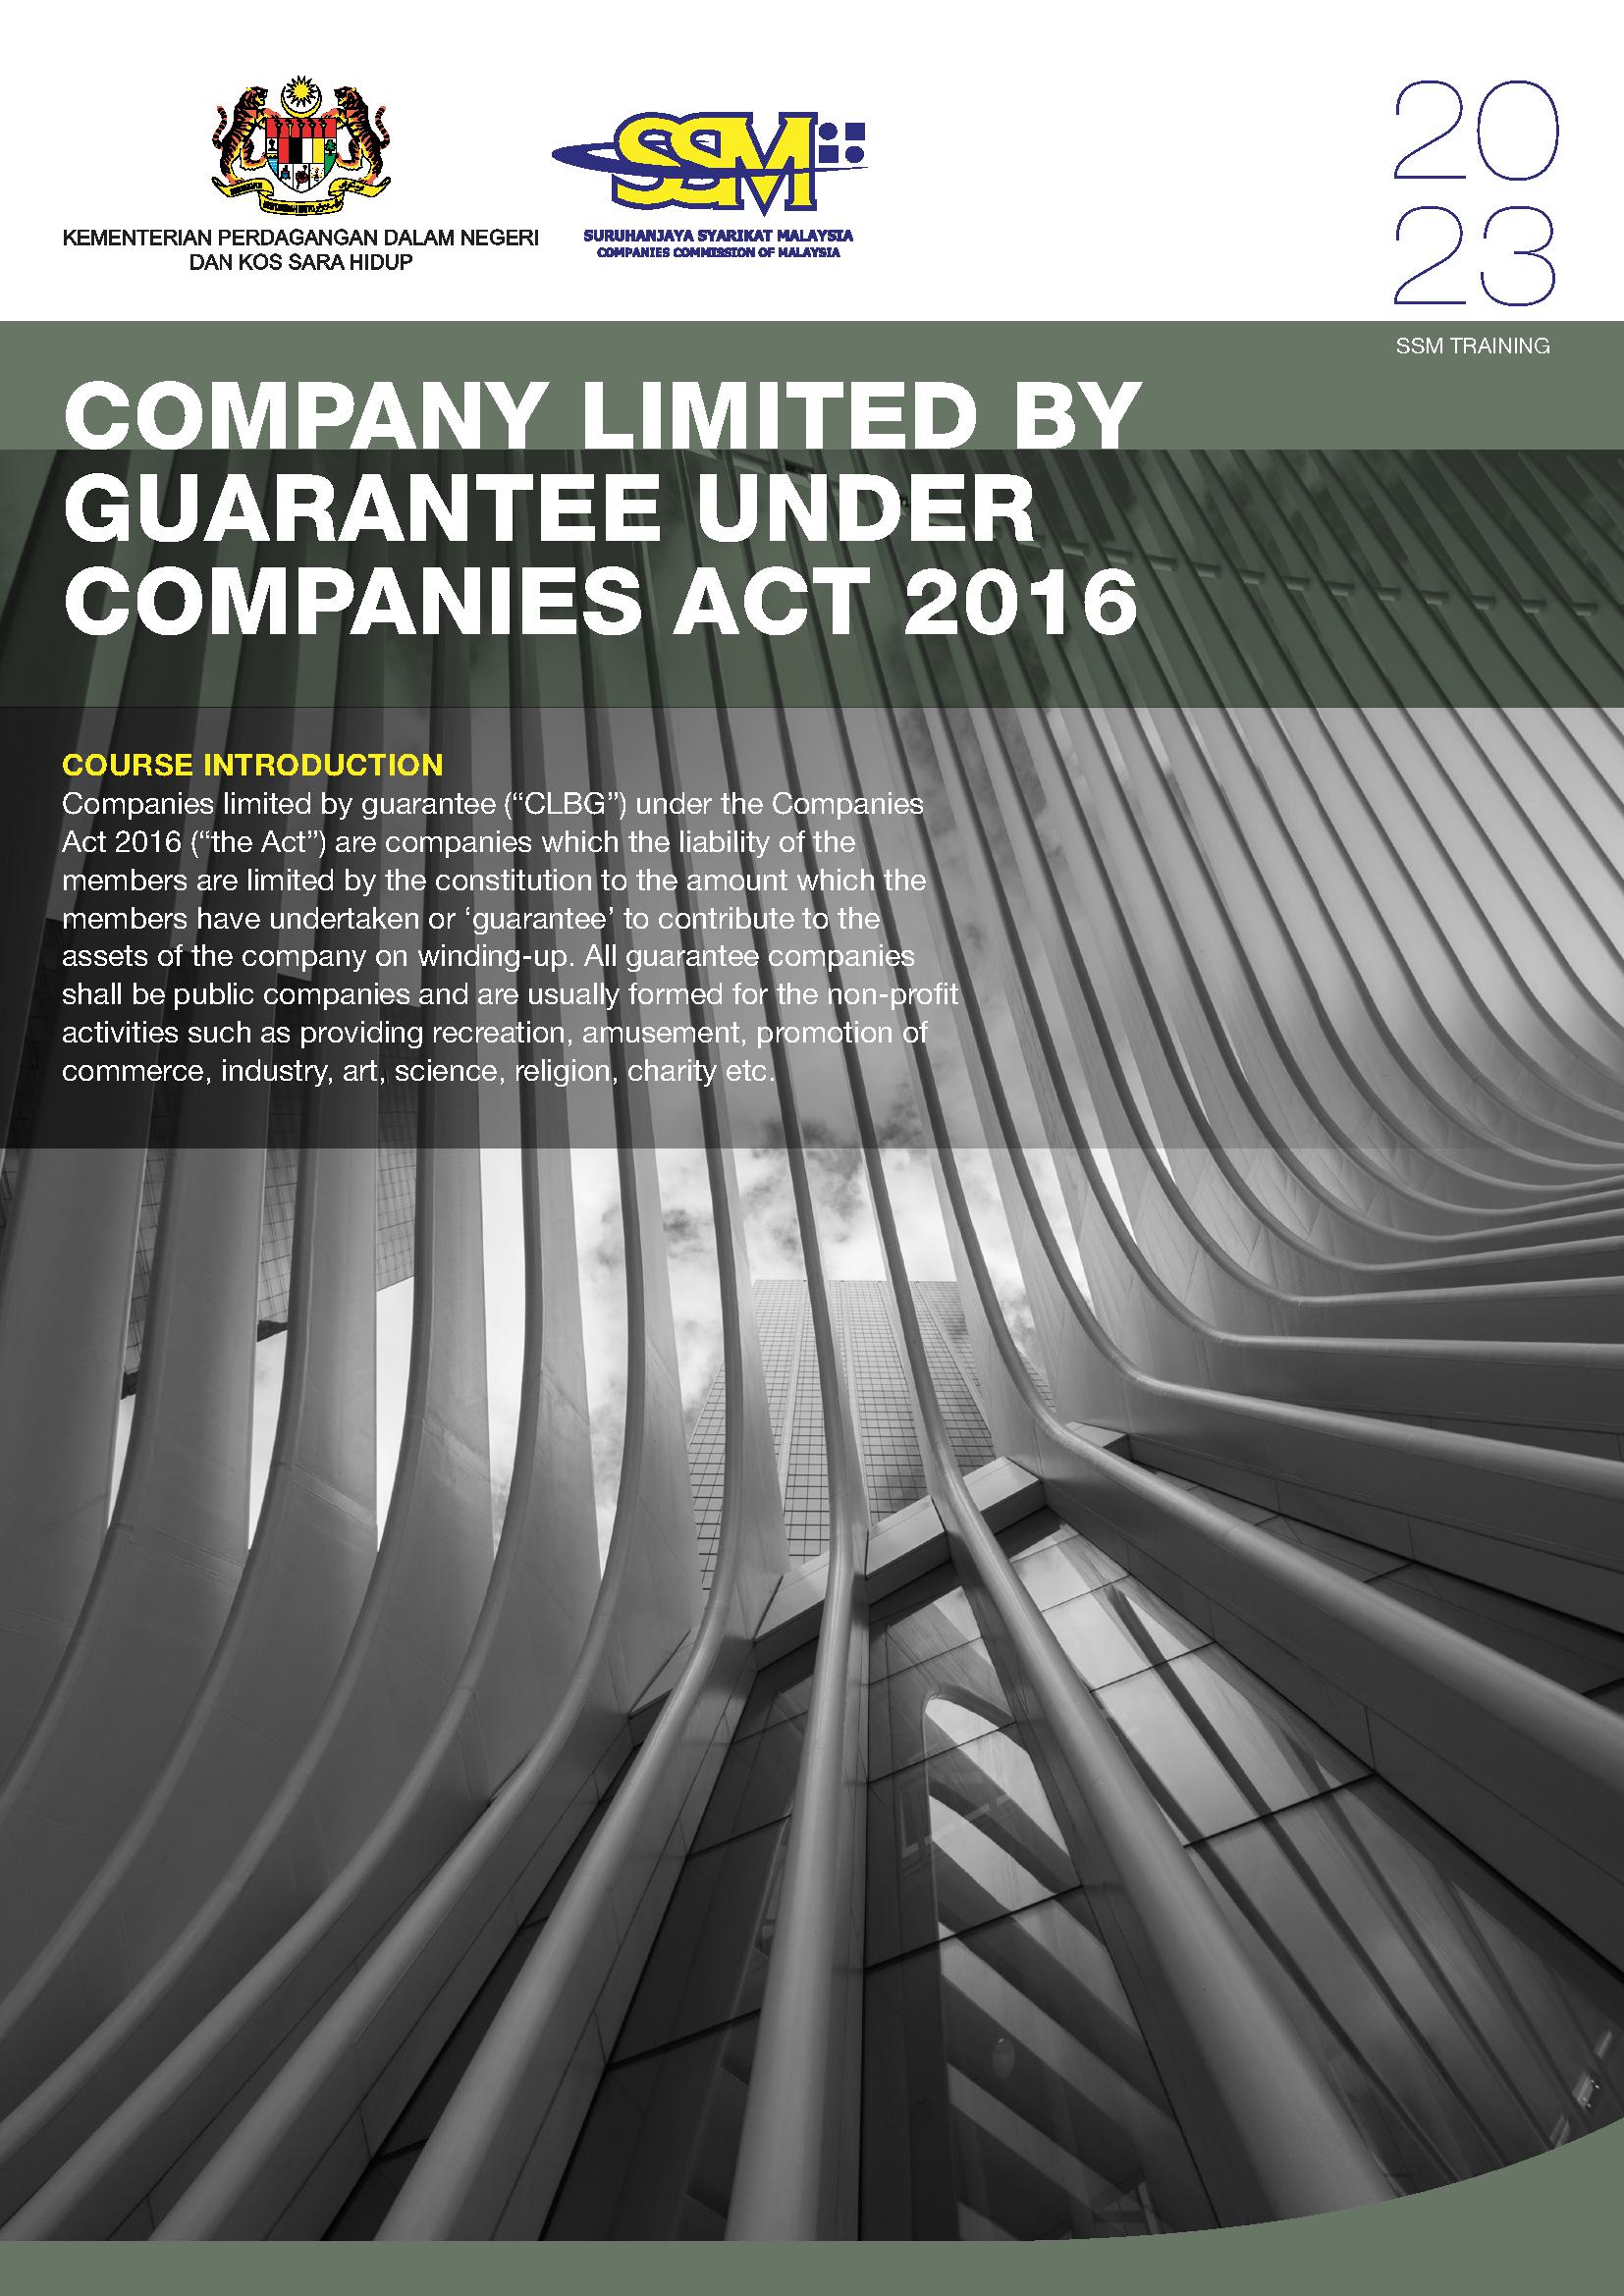 COMPANY LIMITED BY GUARANTEE UNDER COMPANIES ACT 2016.jpg